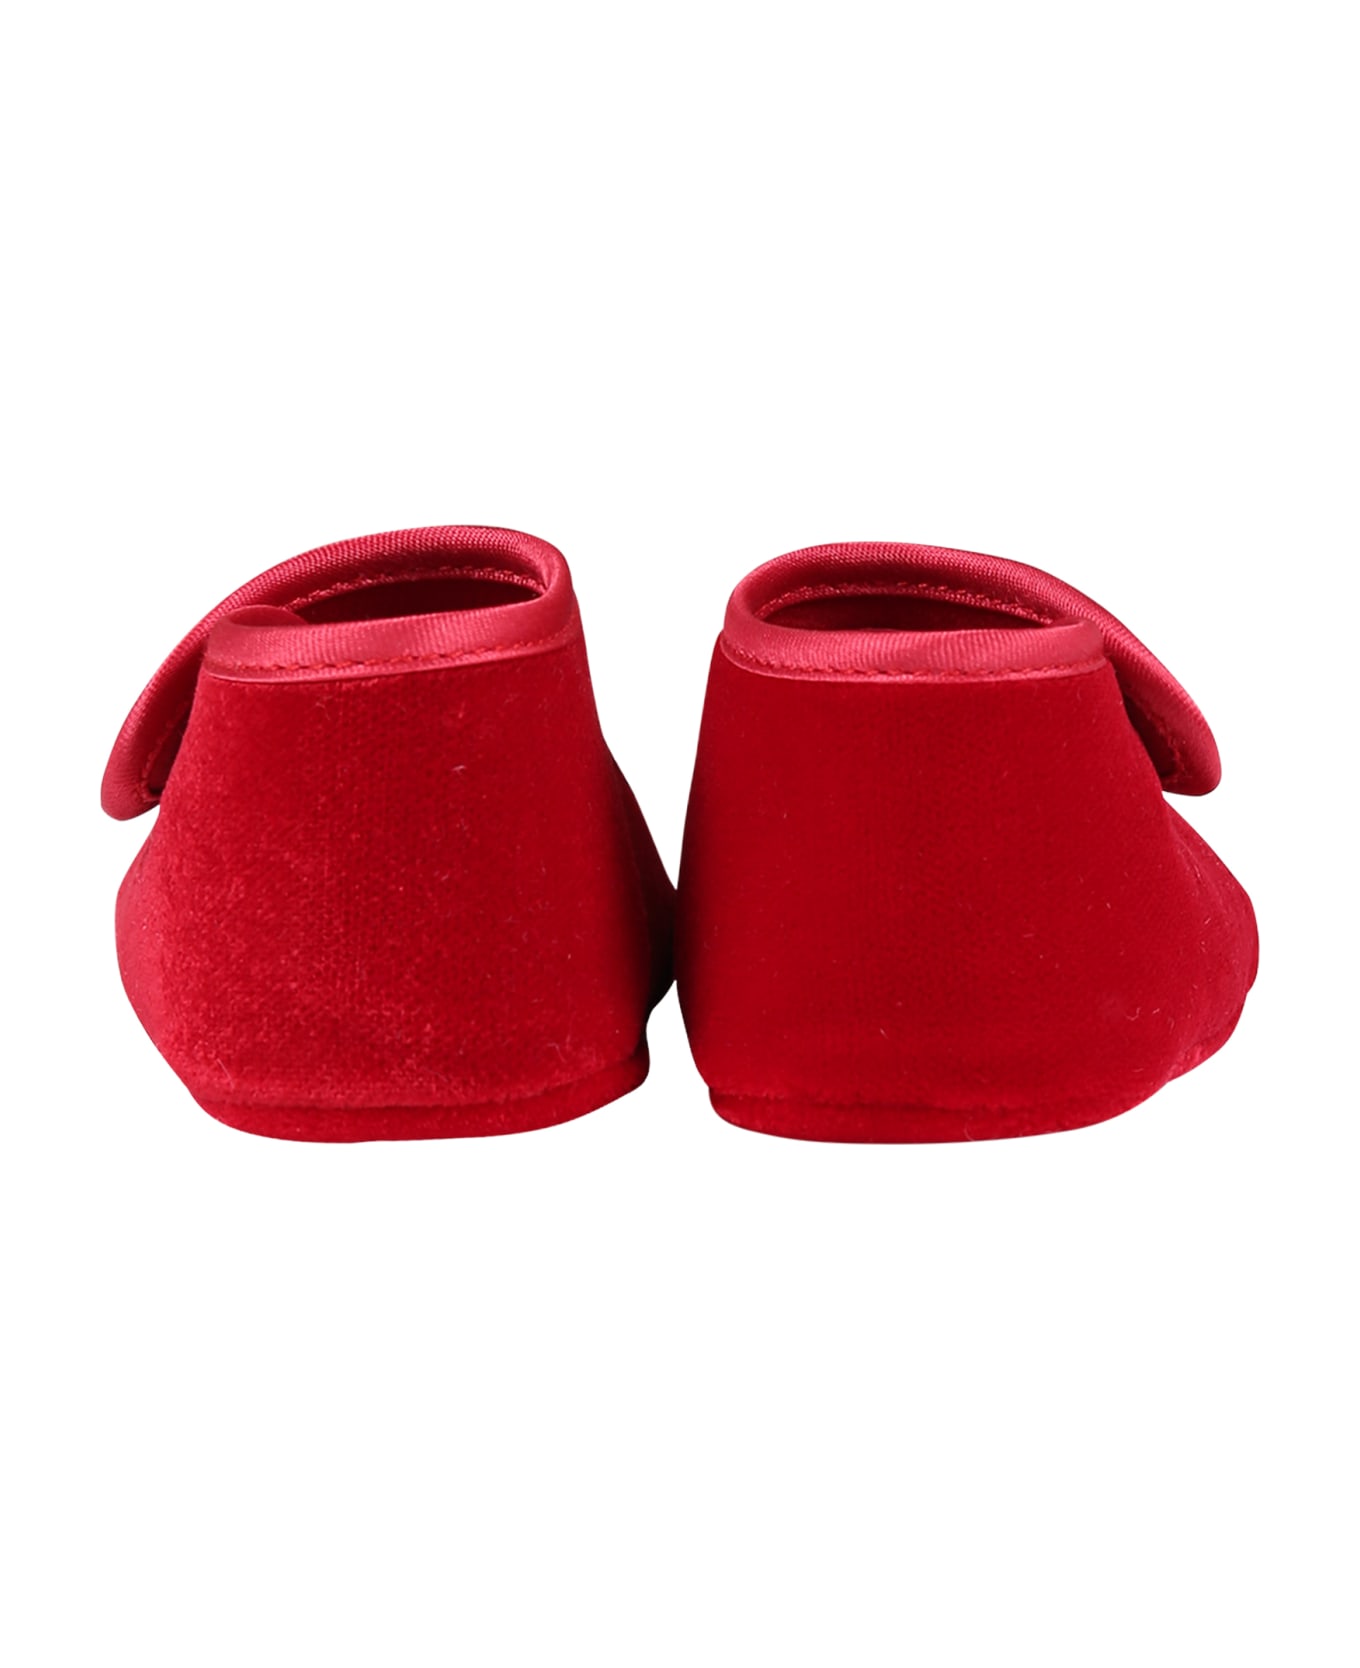 Monnalisa Red Flat Shoes For Baby Girl With Hearts - Red シューズ